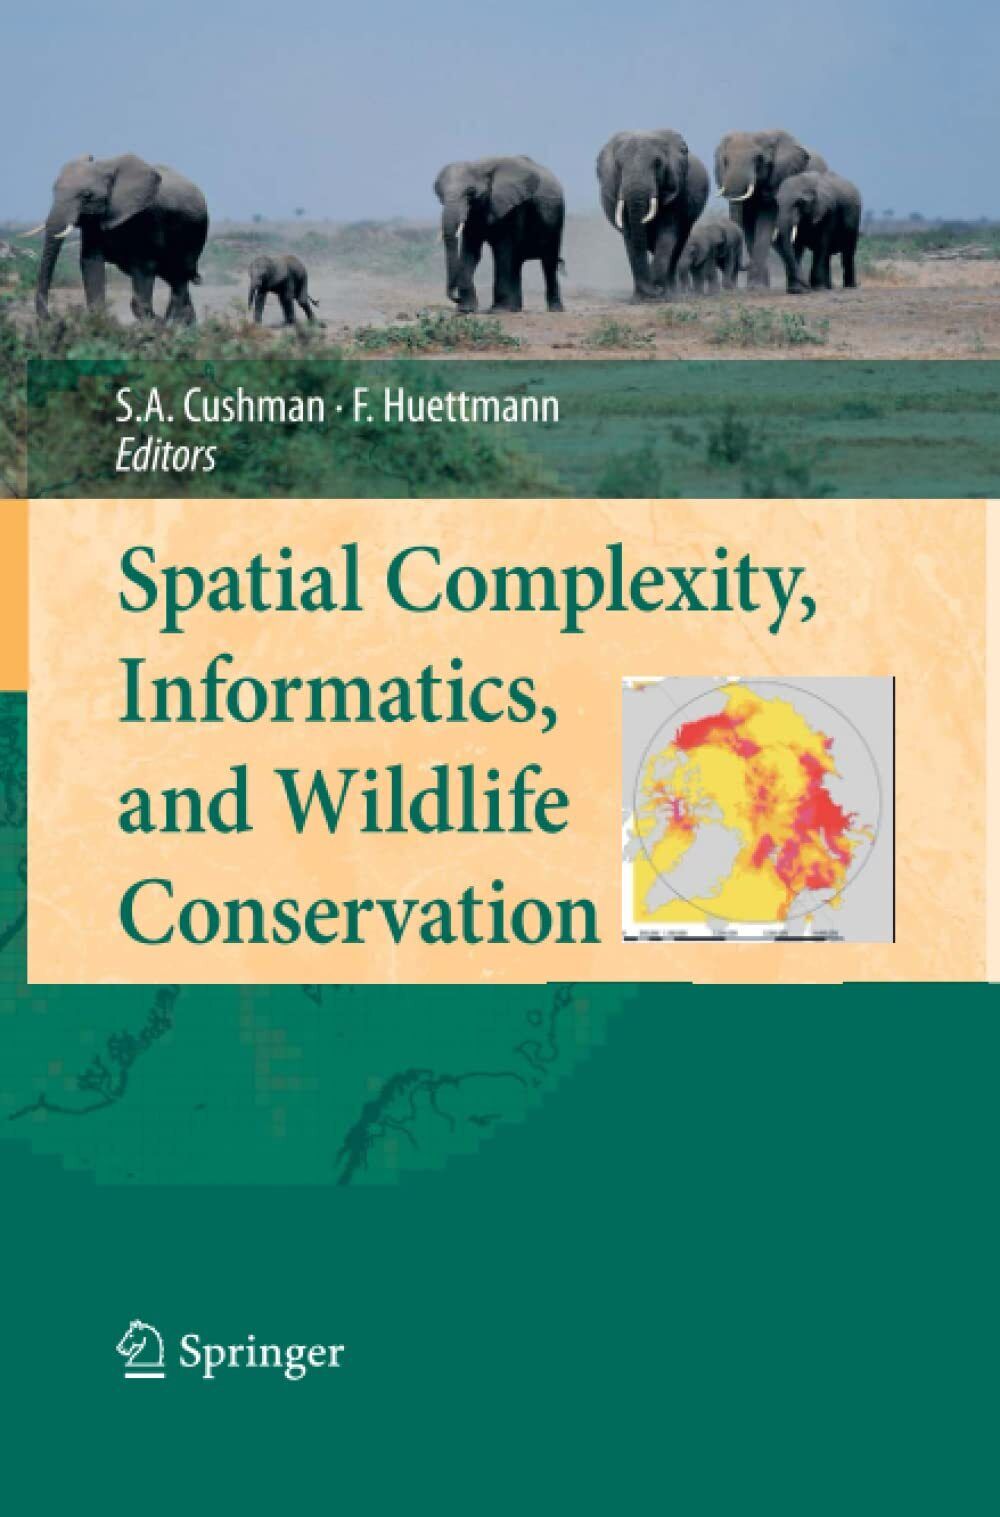 Spatial Complexity, Informatics, and Wildlife Conservation - Springer, 2014